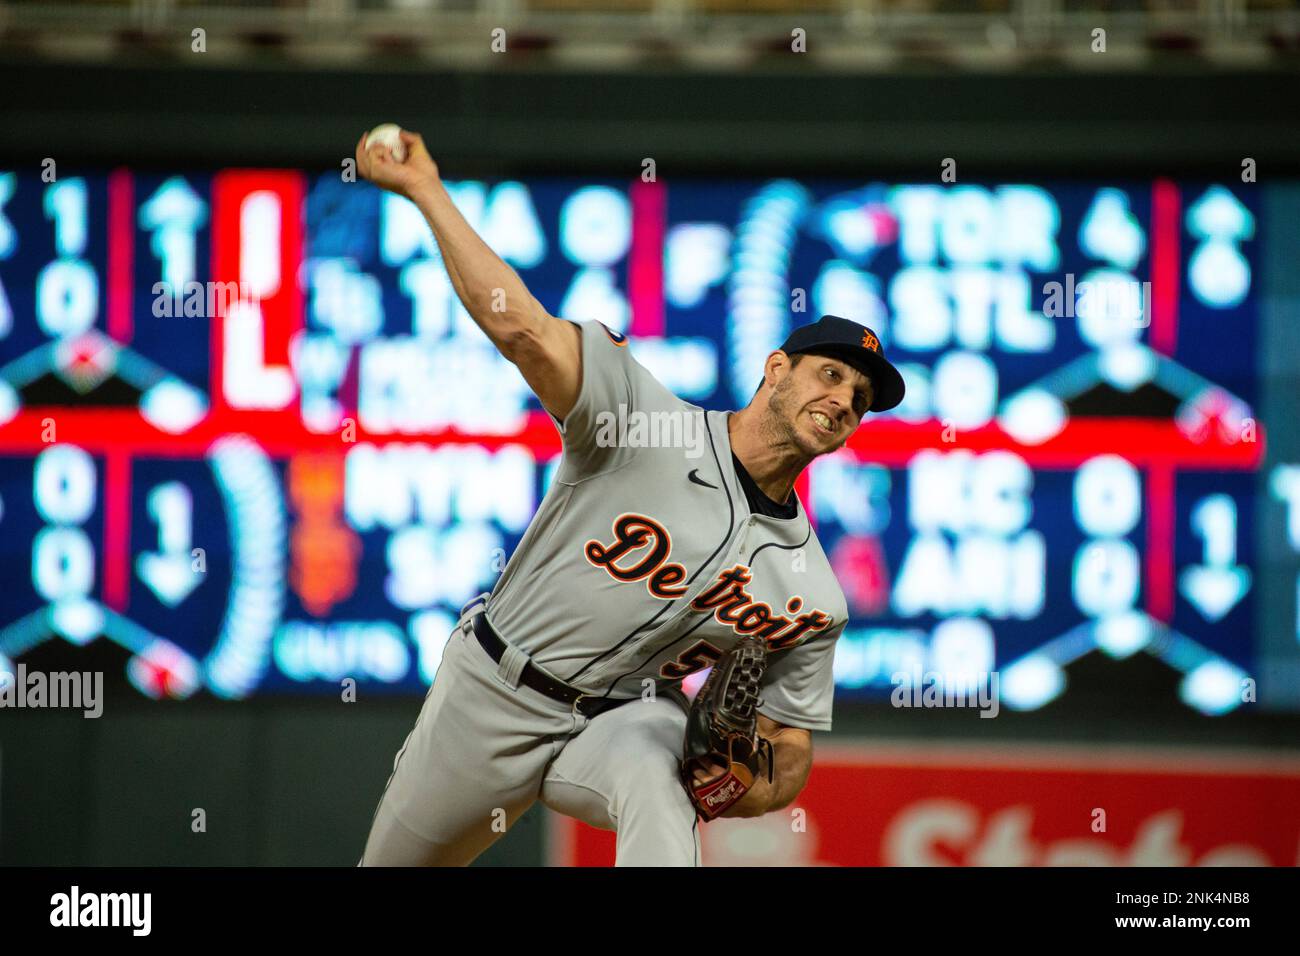 MINNEAPOLIS, MN - MAY 24: Detroit Tigers relief pitcher Alex Lange (55)  delivers a pitch during the MLB game between the Detroit Tigers and  Minnesota Twins on May 24th, 2022, at Target